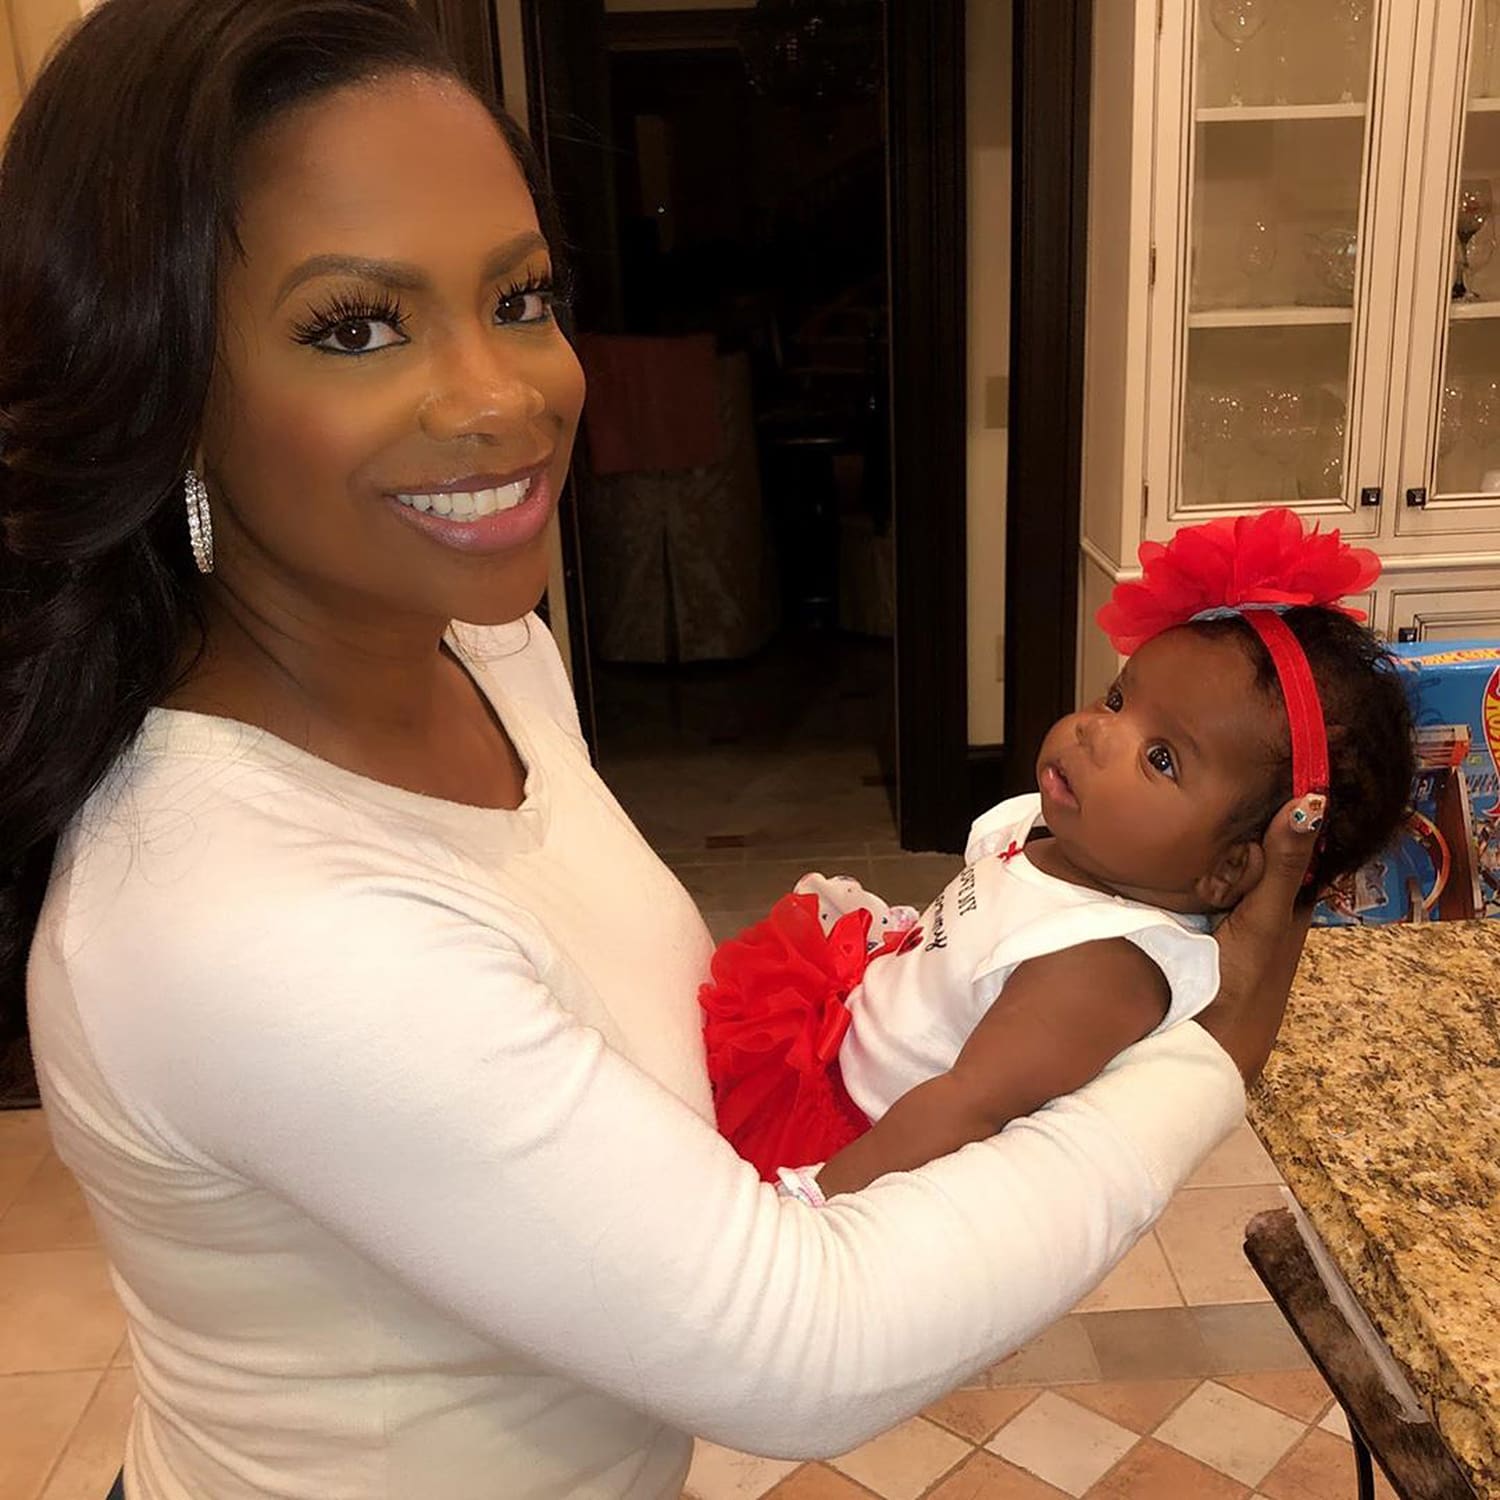 Kandi Burruss Praises Her Love For Baby Blaze Tucker - See The Latest Pics Featuring The Baby Girl